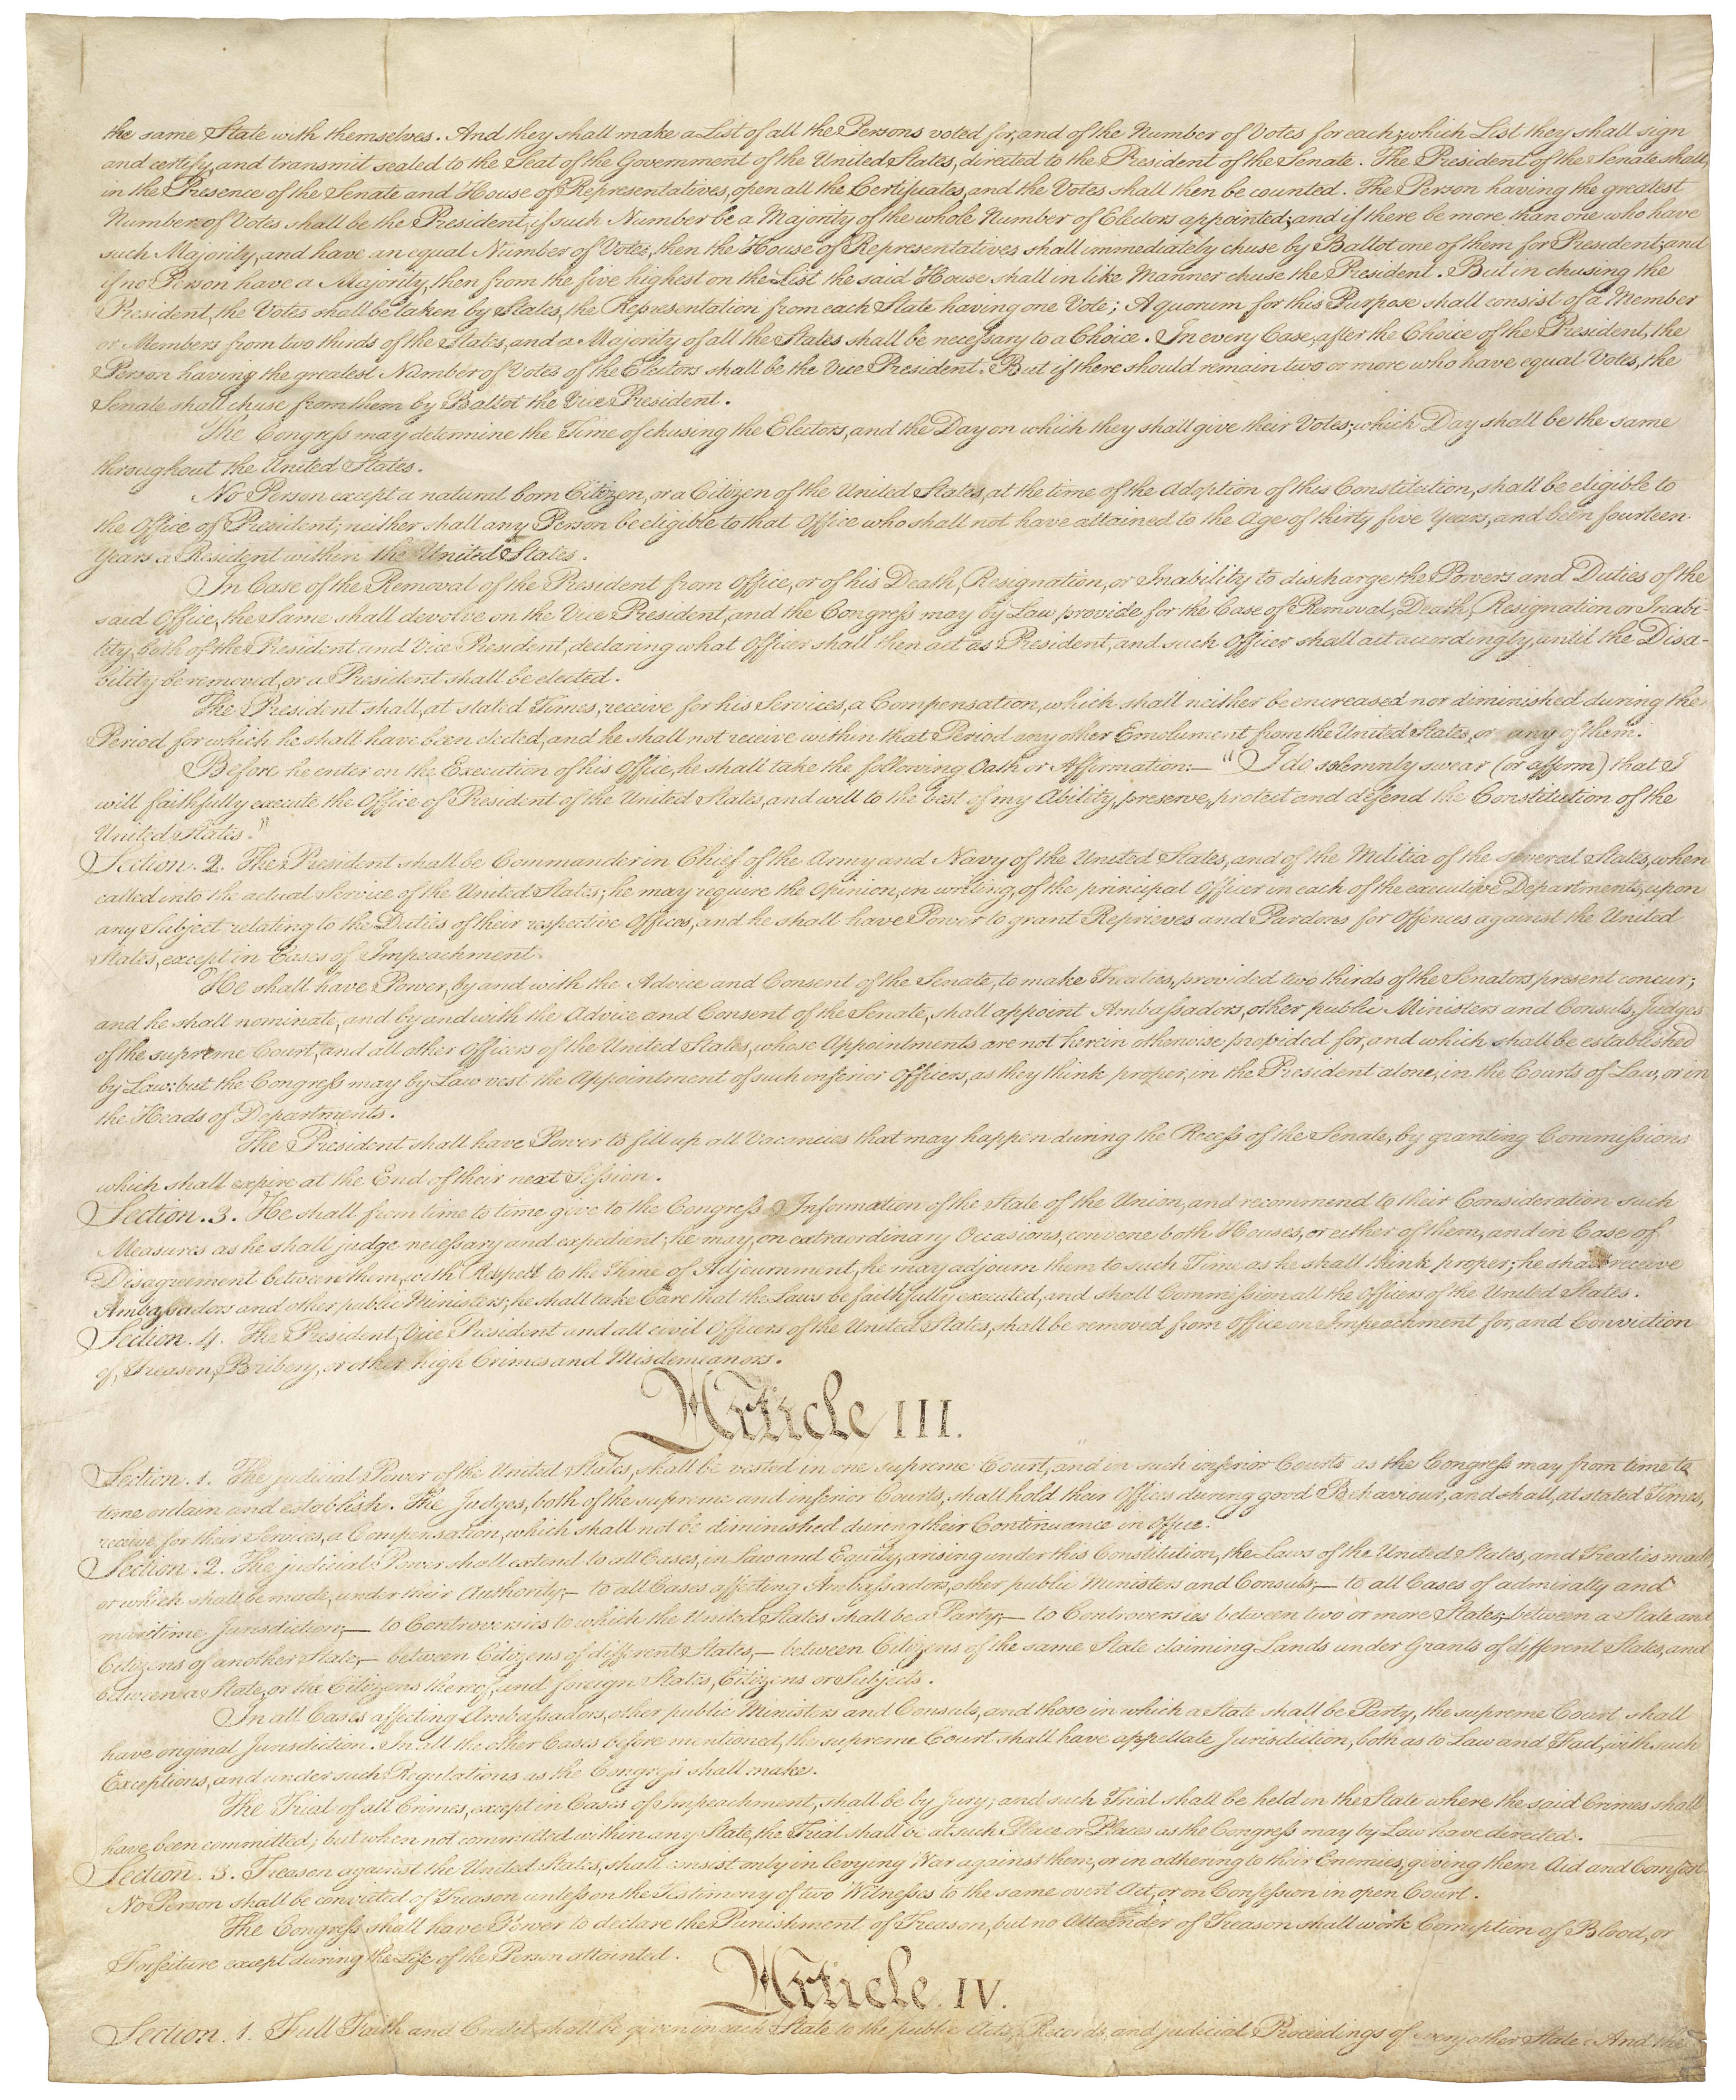 United States Constitution - Page 3 of 4